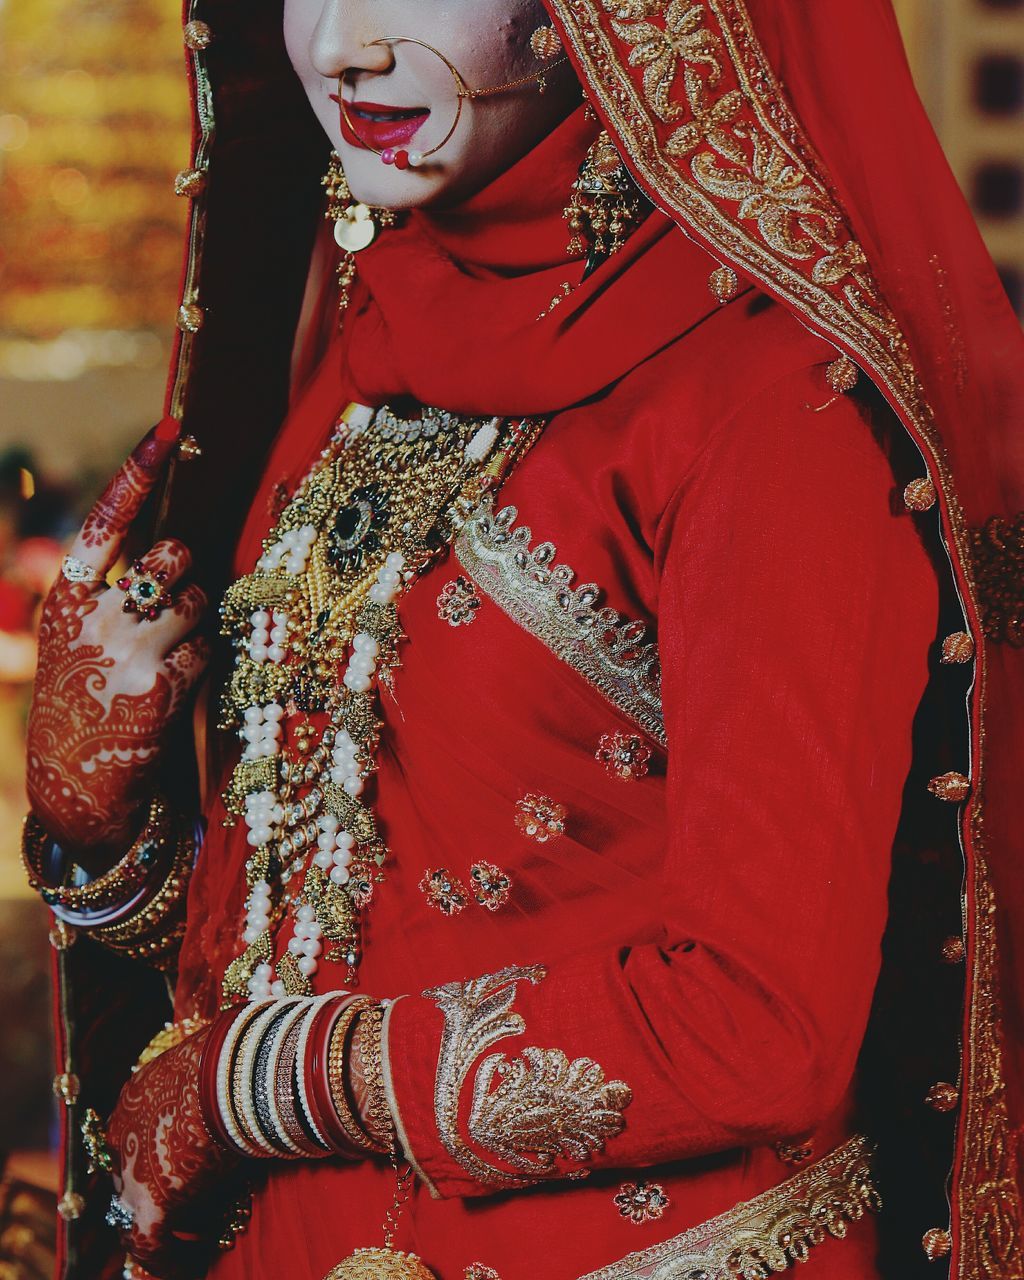 red, tradition, cultures, religion, celebration, spirituality, focus on foreground, person, lifestyles, indoors, midsection, traditional clothing, close-up, leisure activity, hanging, place of worship, temple - building